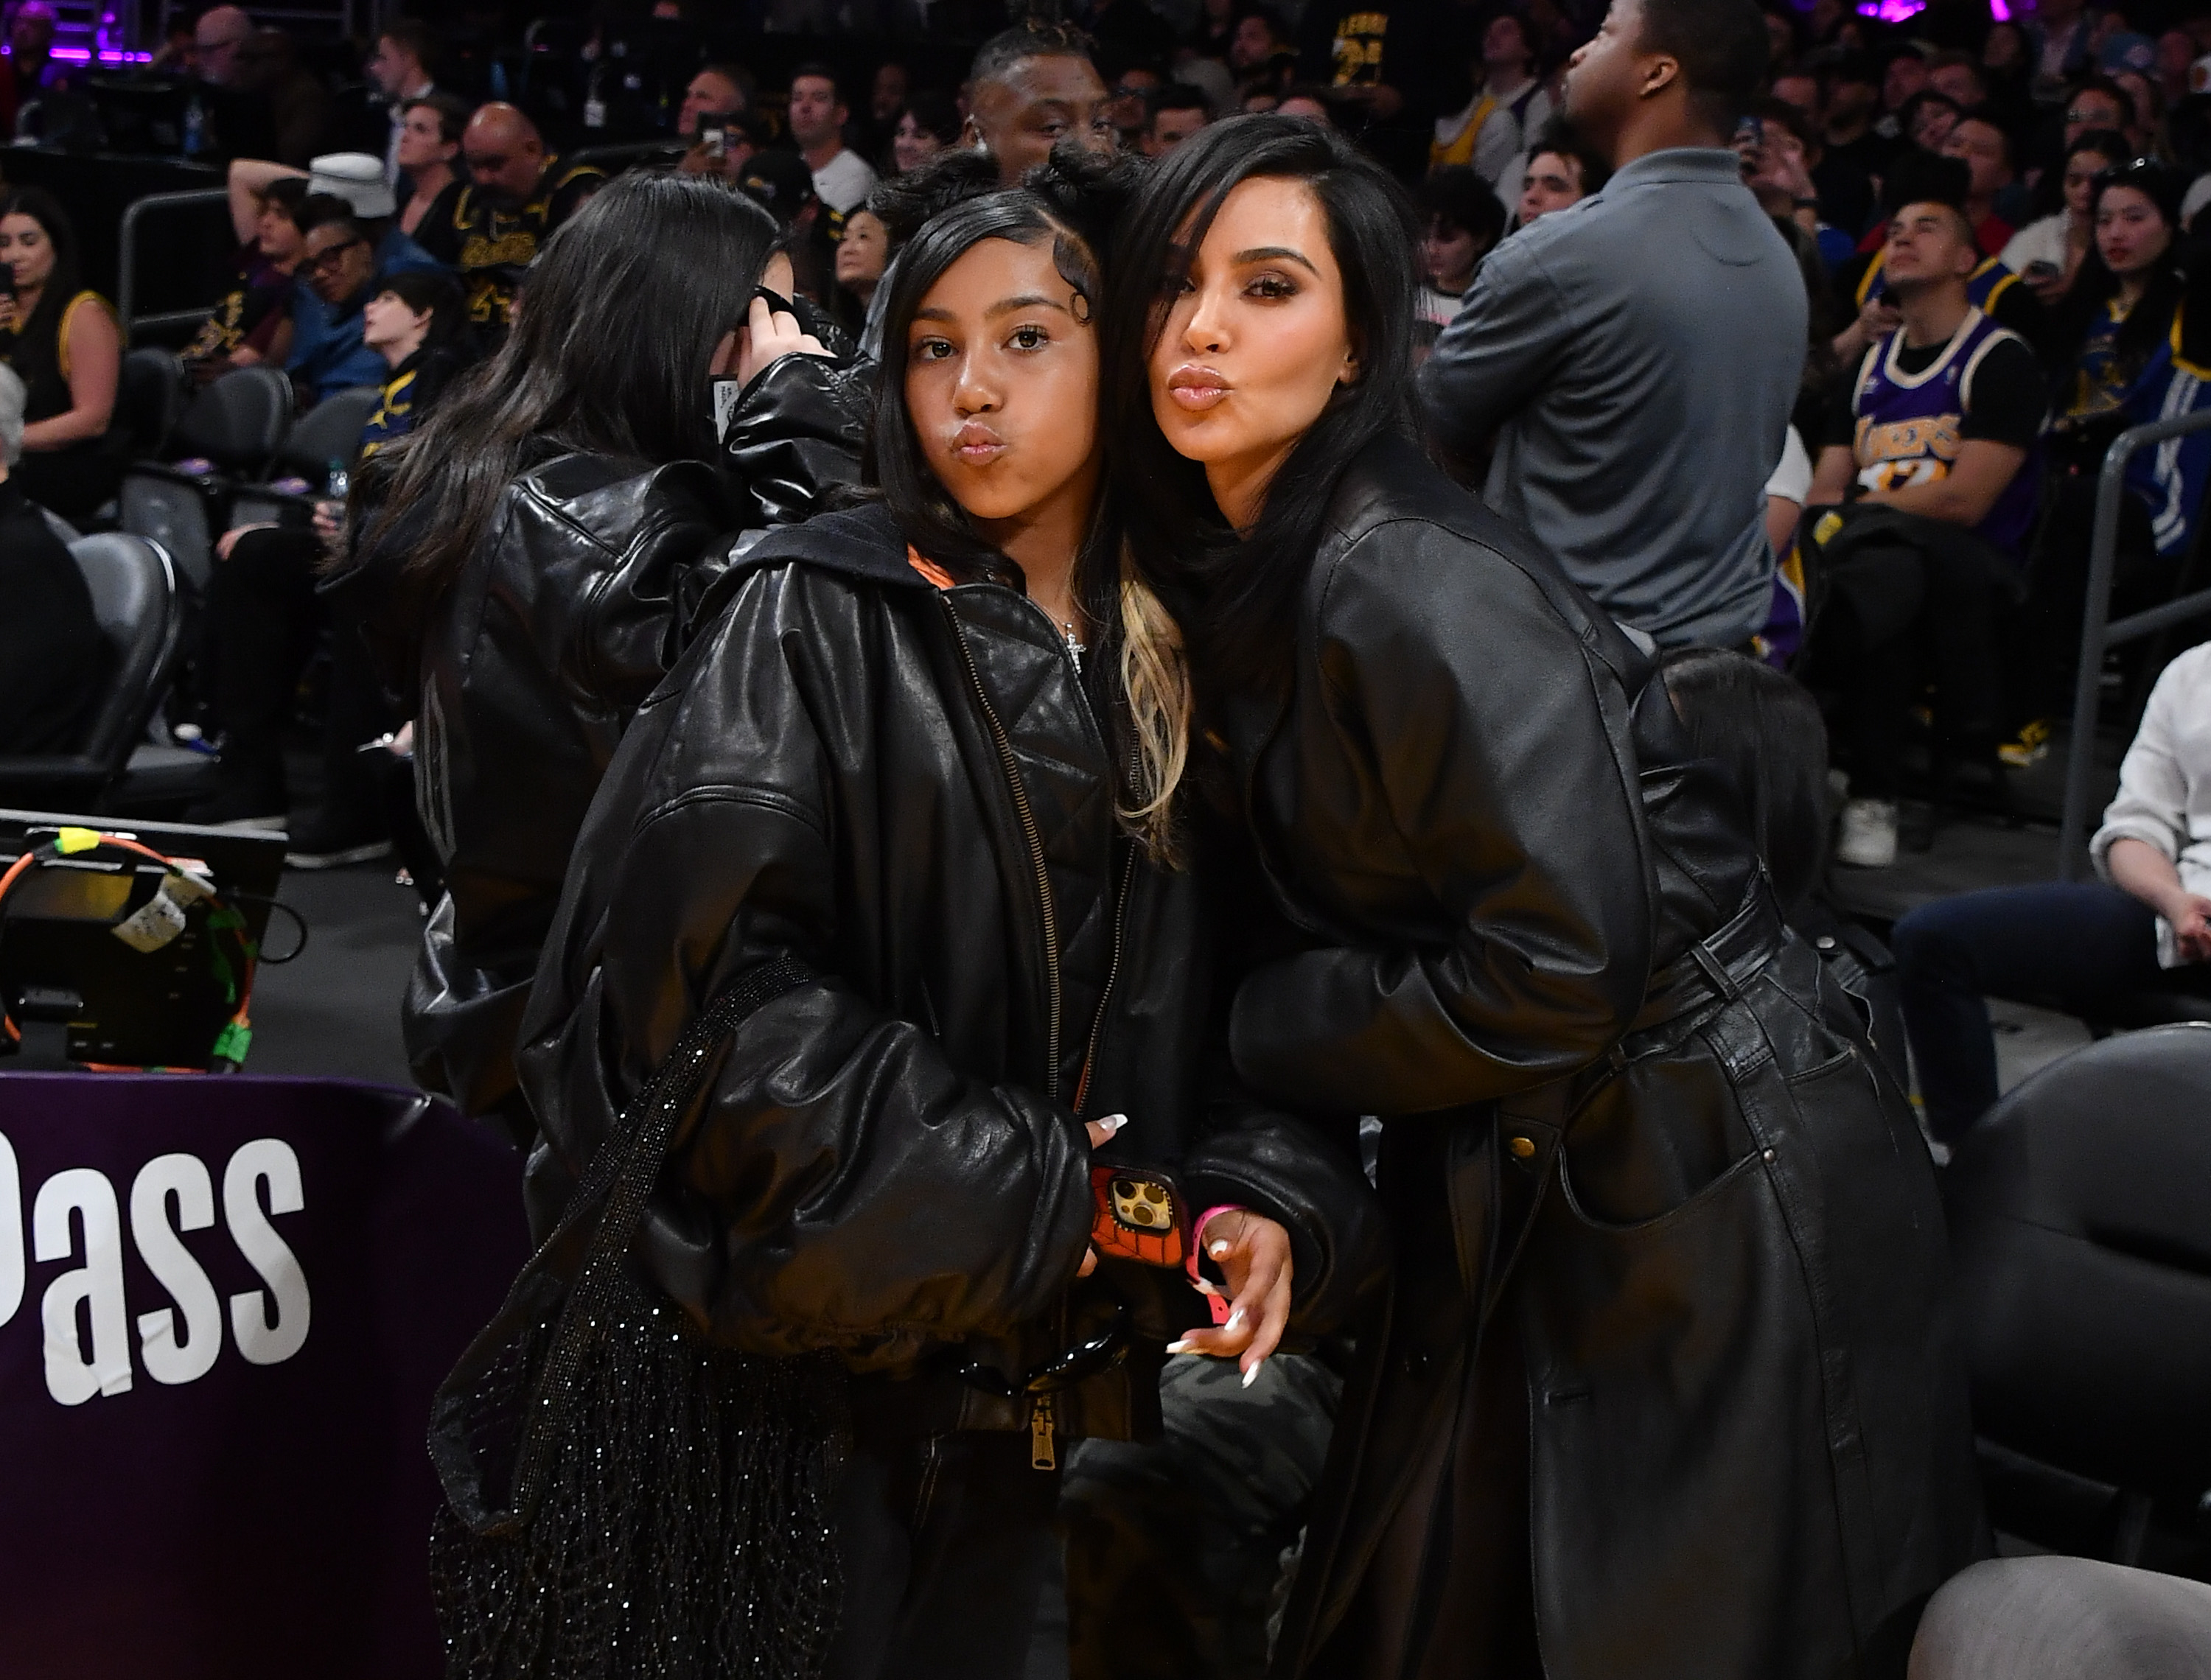 North West and Kim Kardashian at an event